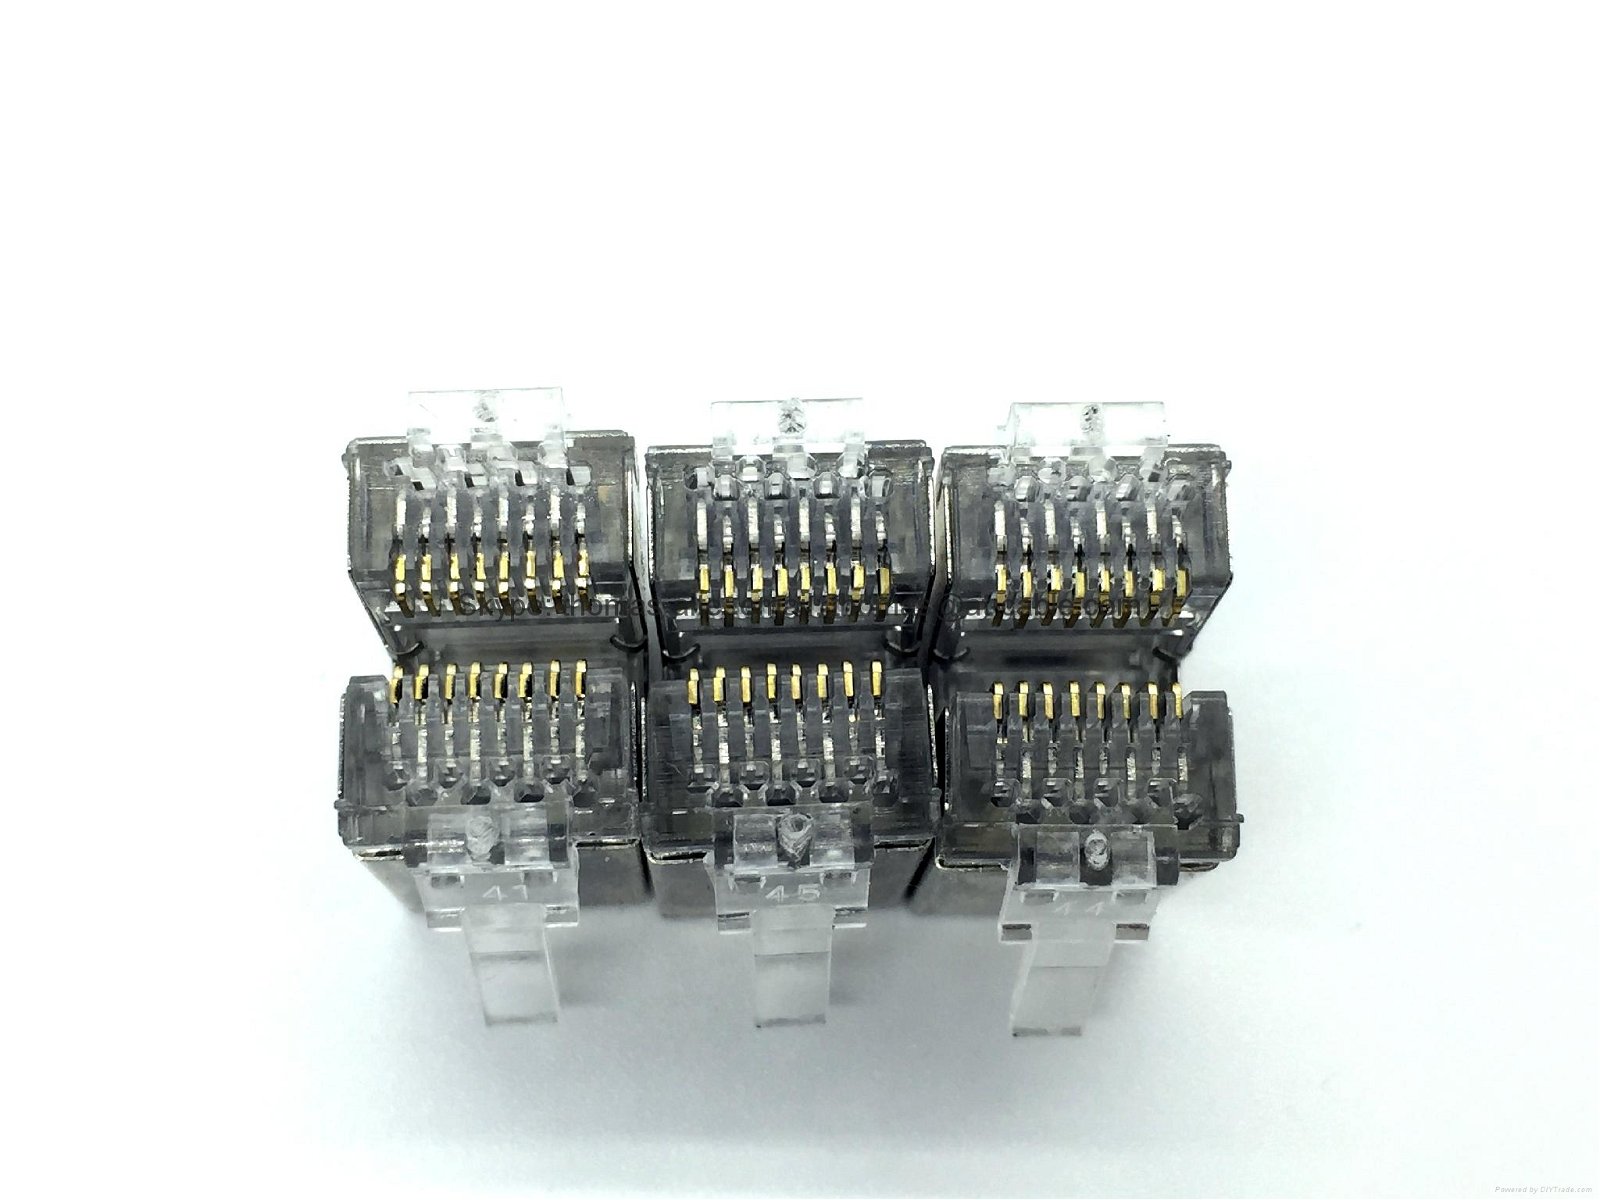 RJ45 Connector CAT5E/ CAT6 with a hole in front